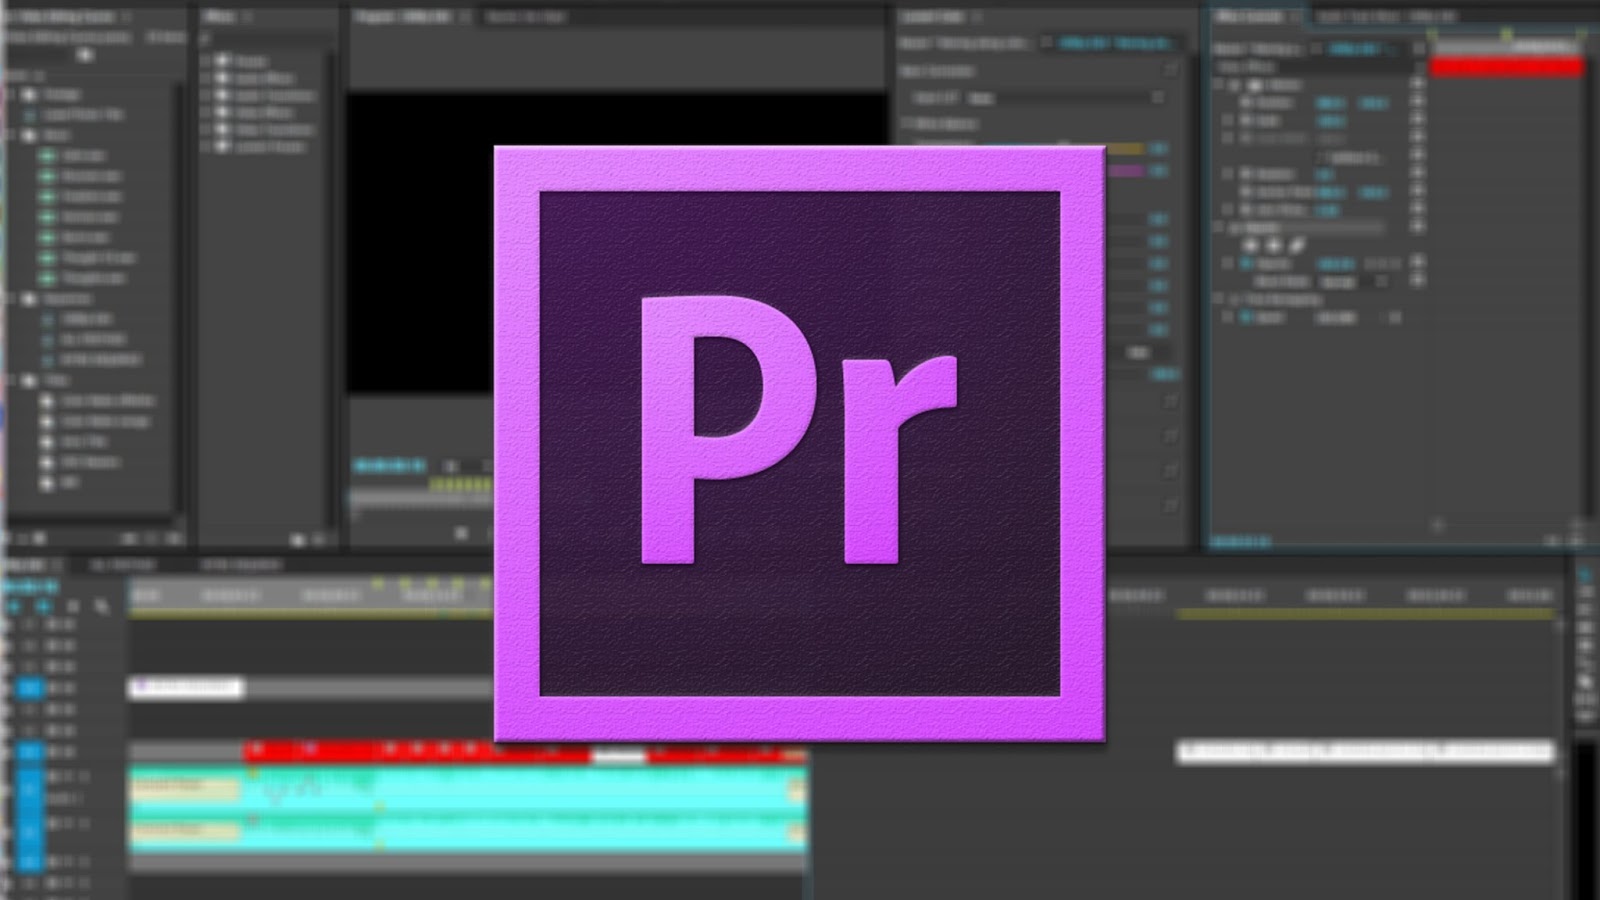 adobe after effect cc 2017 14.0.1 download bagas